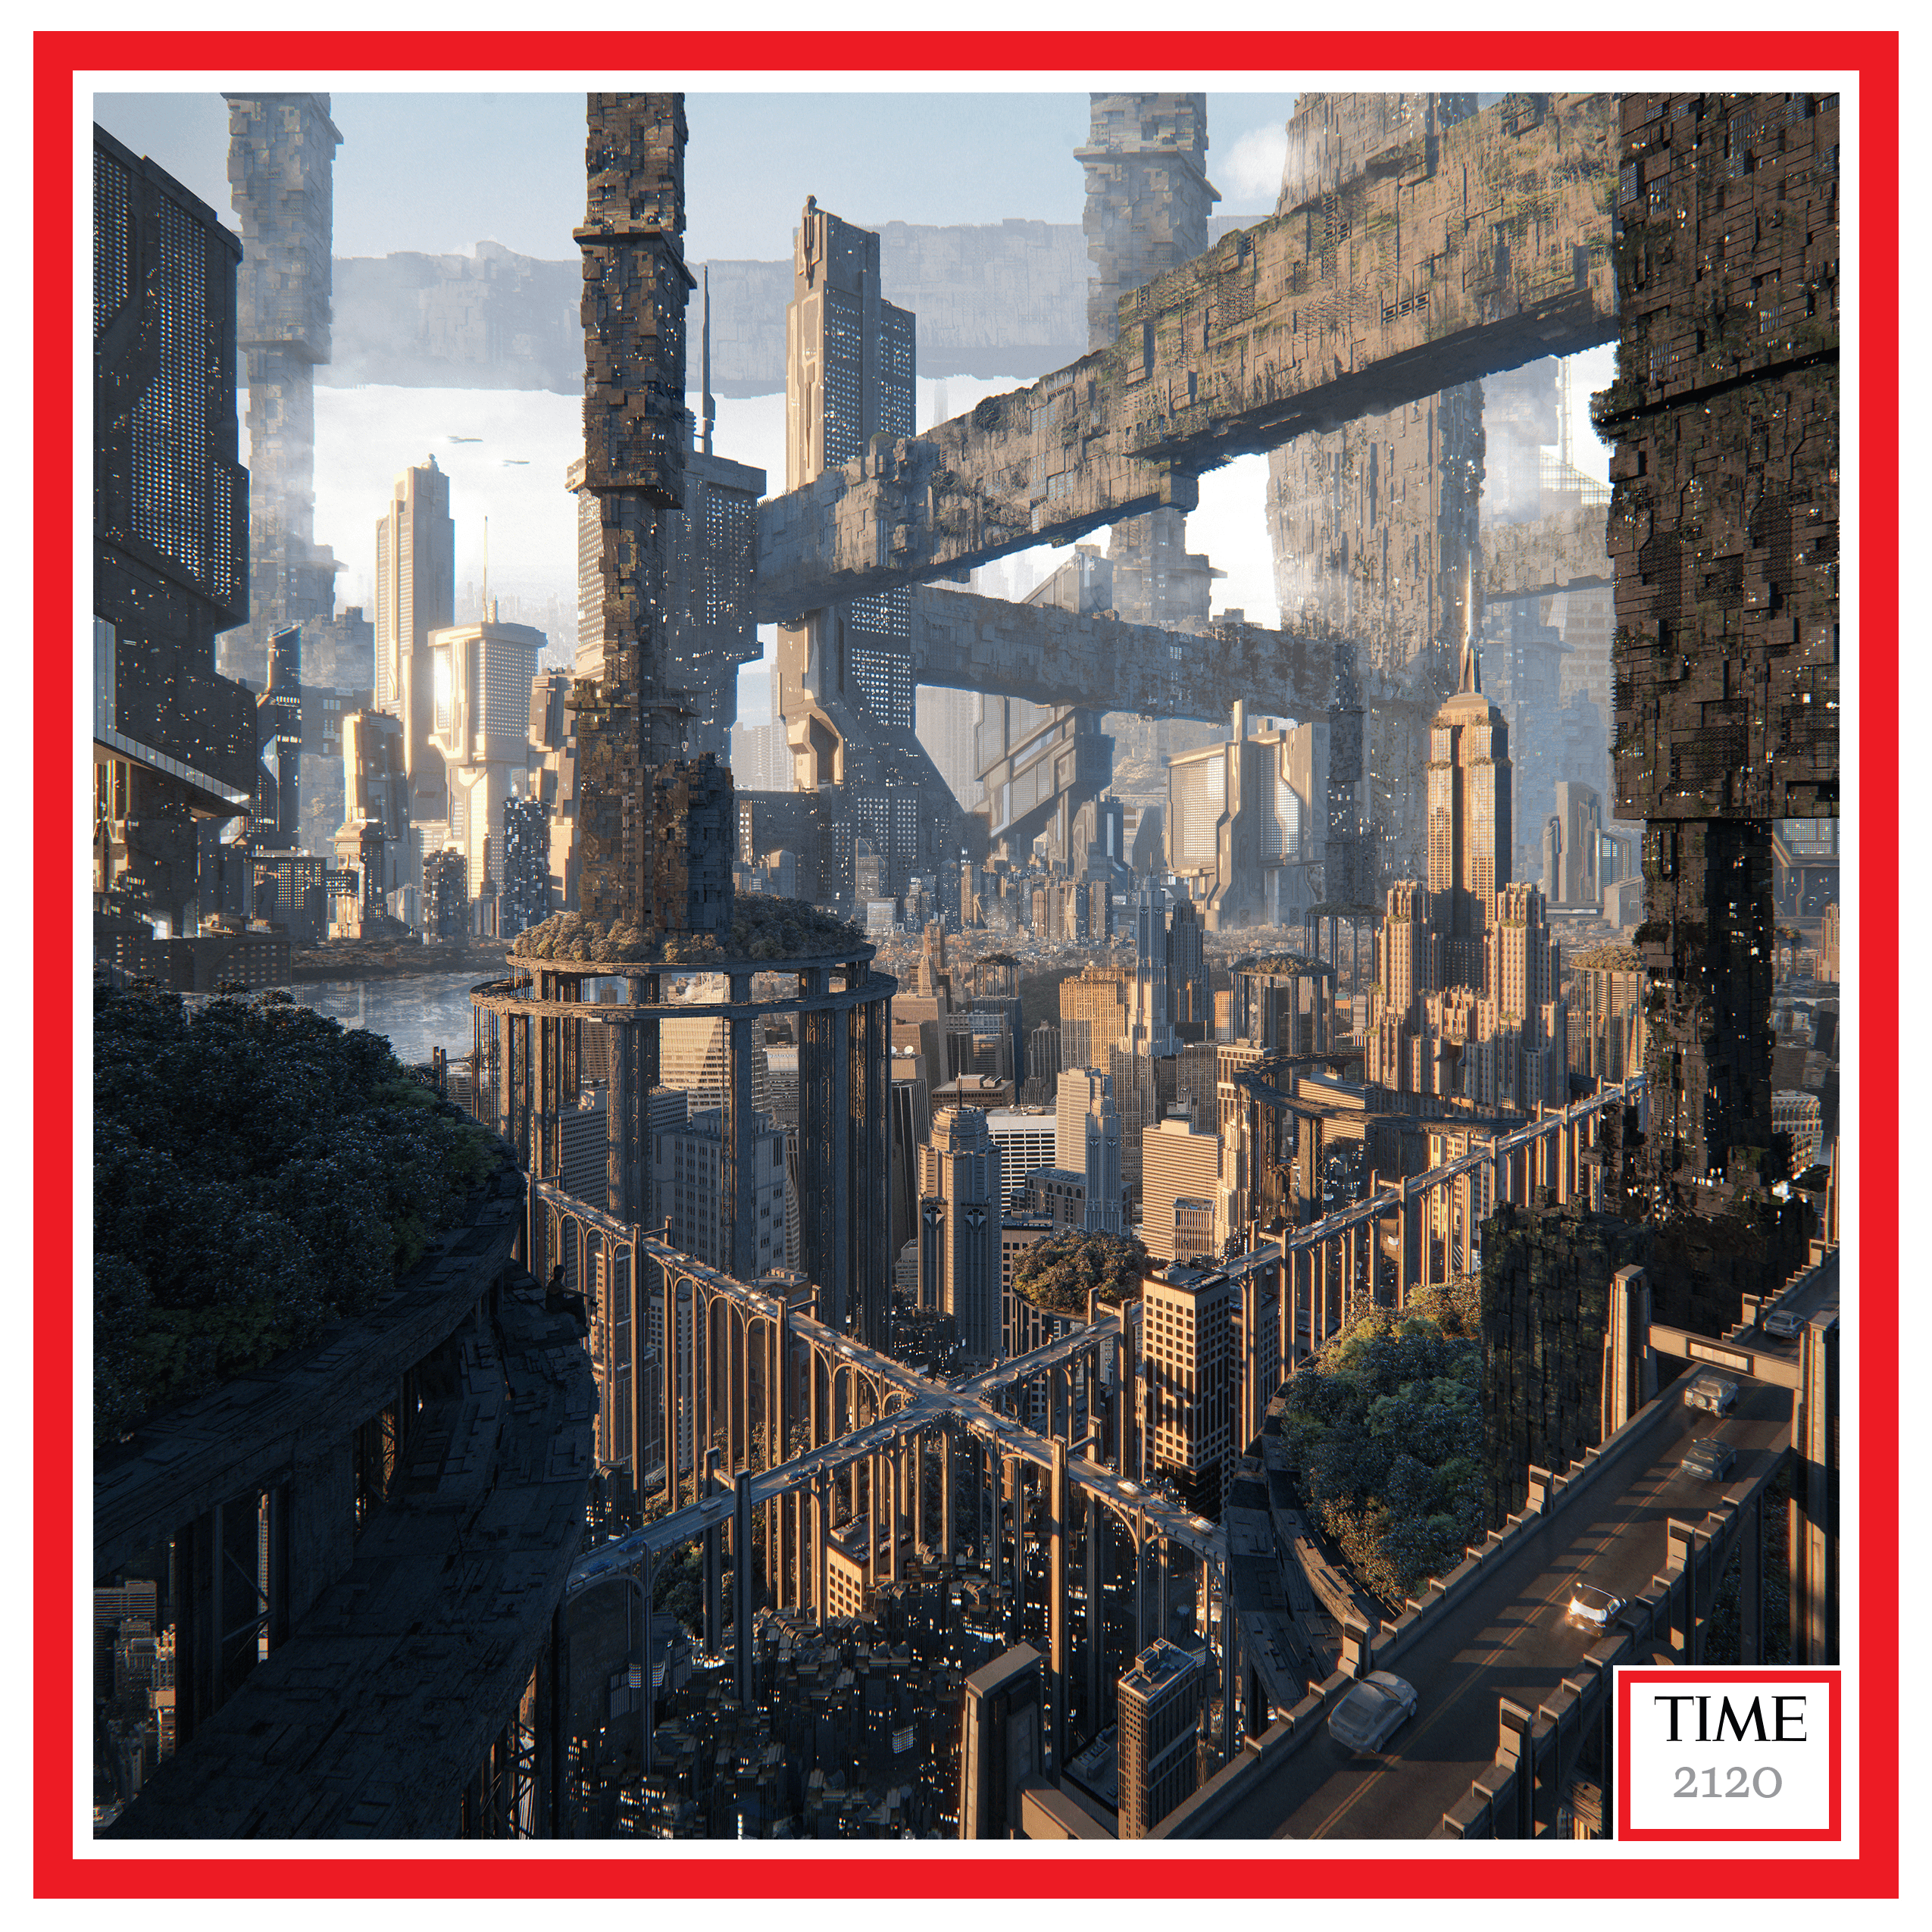 Highgardens of NYC, 2120 by Idil Dursun